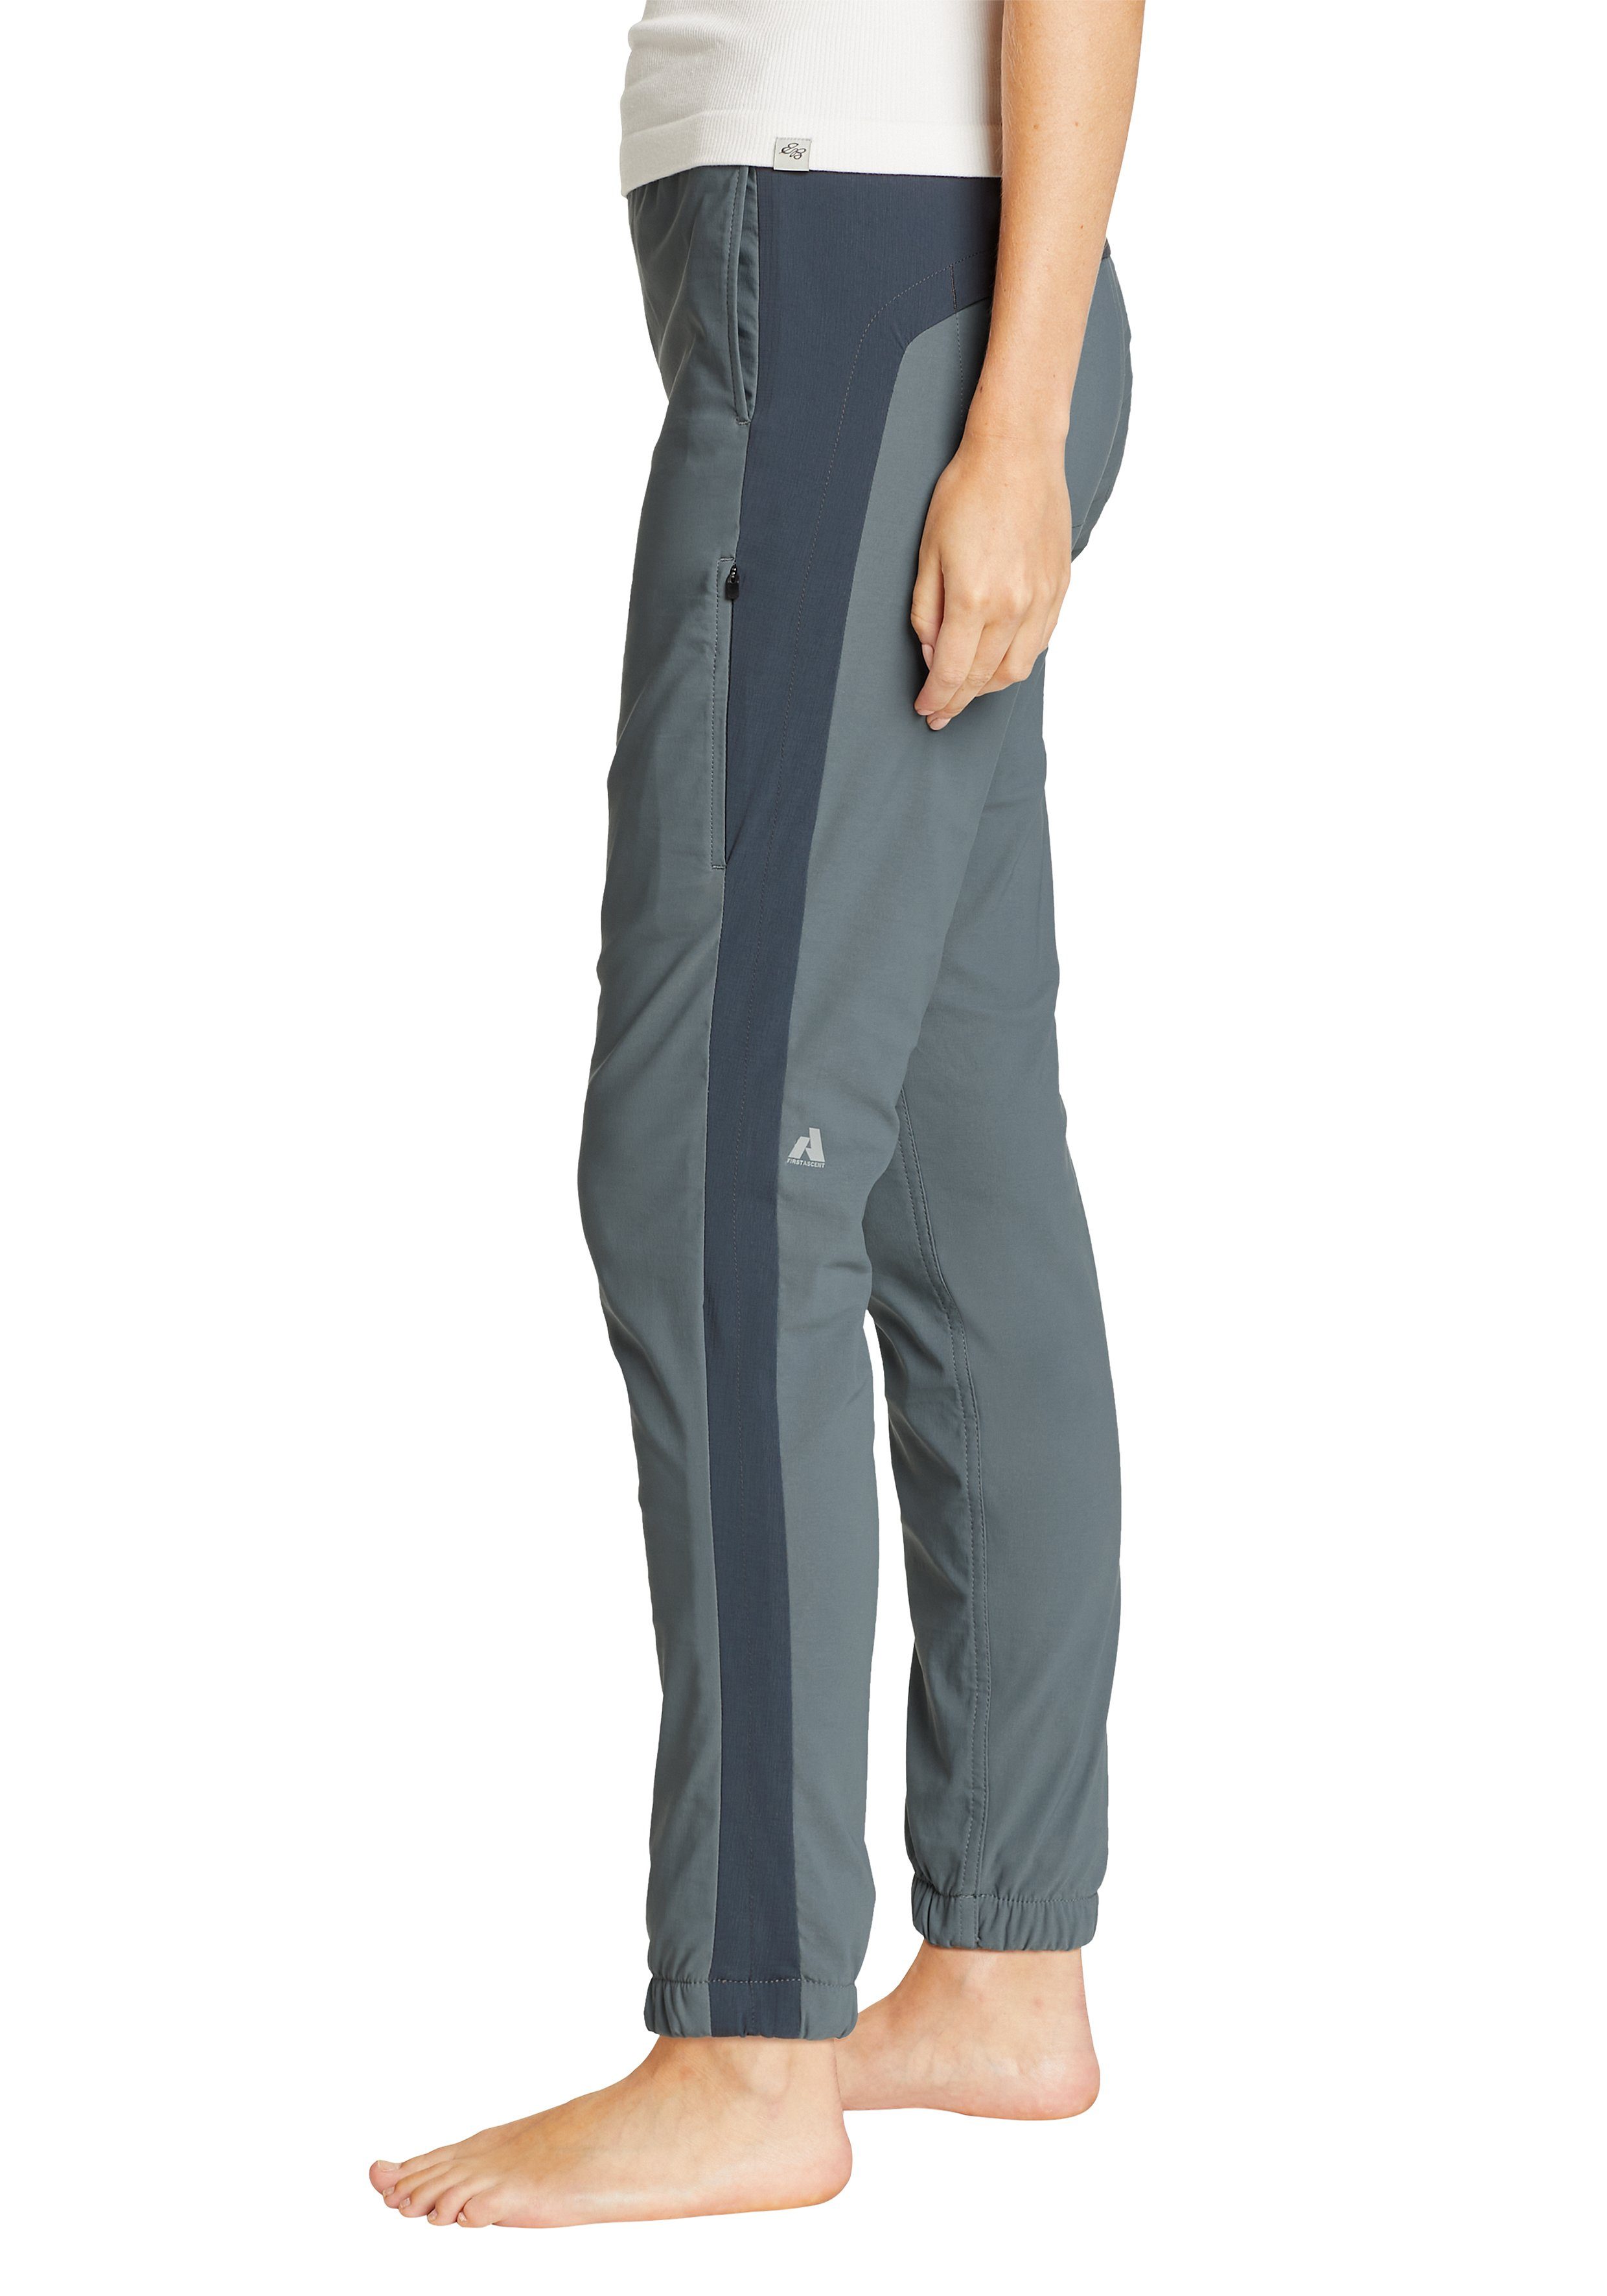 Eddie Bauer Jogger Pants Guide gefüttert Pro Thermo - Jogger Graphit